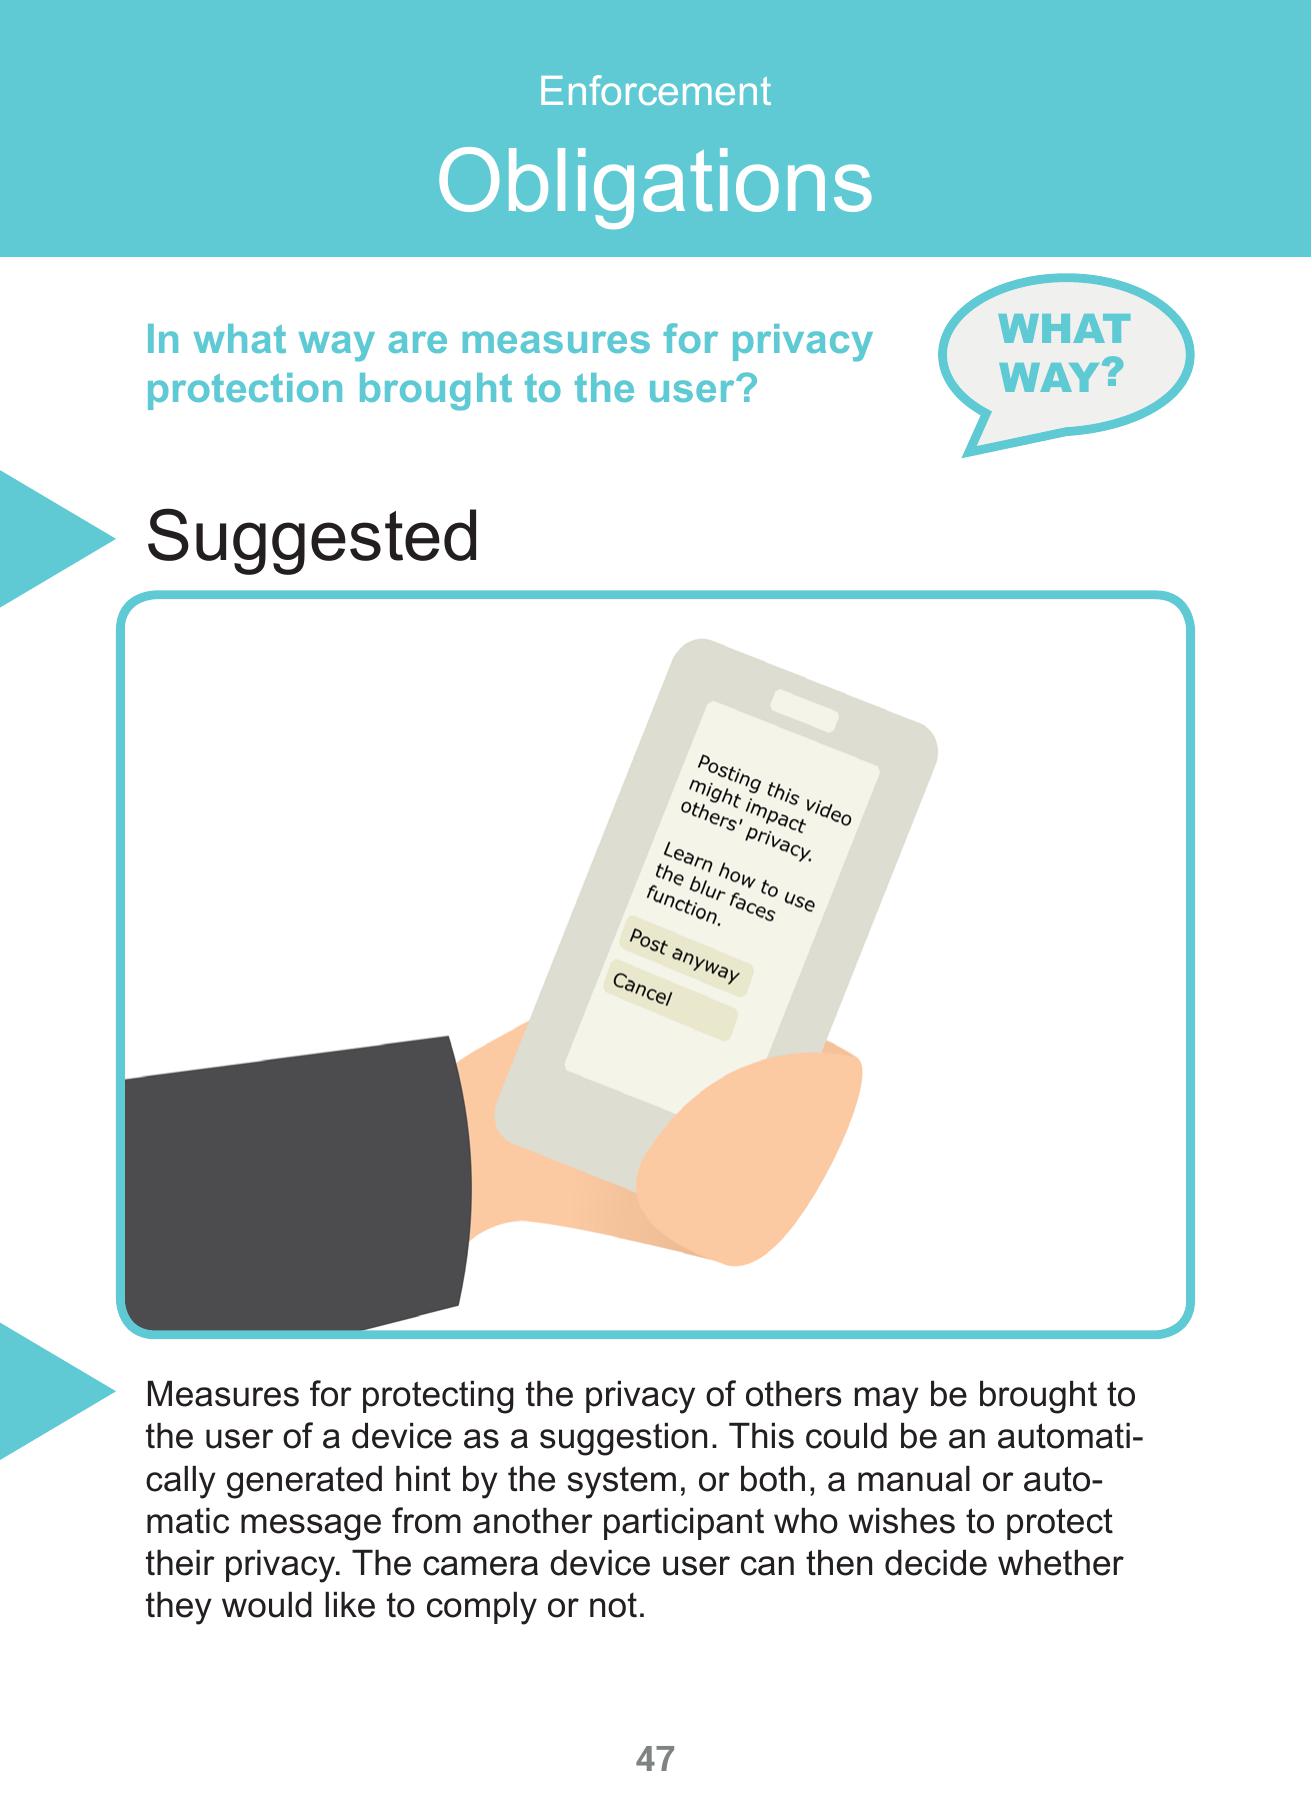 The image shows the front of a card. At the top there is a header with a light blue background, the rest of the card has a white background The header has the word Enforcement in small letters and the word Obligations in bigger letters in it. Below the header are the words In what way are measures for privacy protection brought to the user?, to the right of it is a speech bubble with the word WHAT WAY? in it. Below that is a heading that says Suggested, to the left of it is a light blue triangle. Below that is an image with a light blue border with rounded corners. A hand is holding a phone. On its screen is a message saying Posting this video might impact others privacy. Learn how to use the blur faces function. There are two buttons below the message, one saying Post anyway the other saying Cancel Below that is a paragraph with a light blue triangle to the left of it. The paragraph reads Measures for protecting the privacy of others may be brought to the user of a device as a suggestion. This could be an automatically generated hint by the system, or both, a manual or automatic message from another participant who wishes to protect their privacy. The camera device user can then decide whether they would like to comply or not.